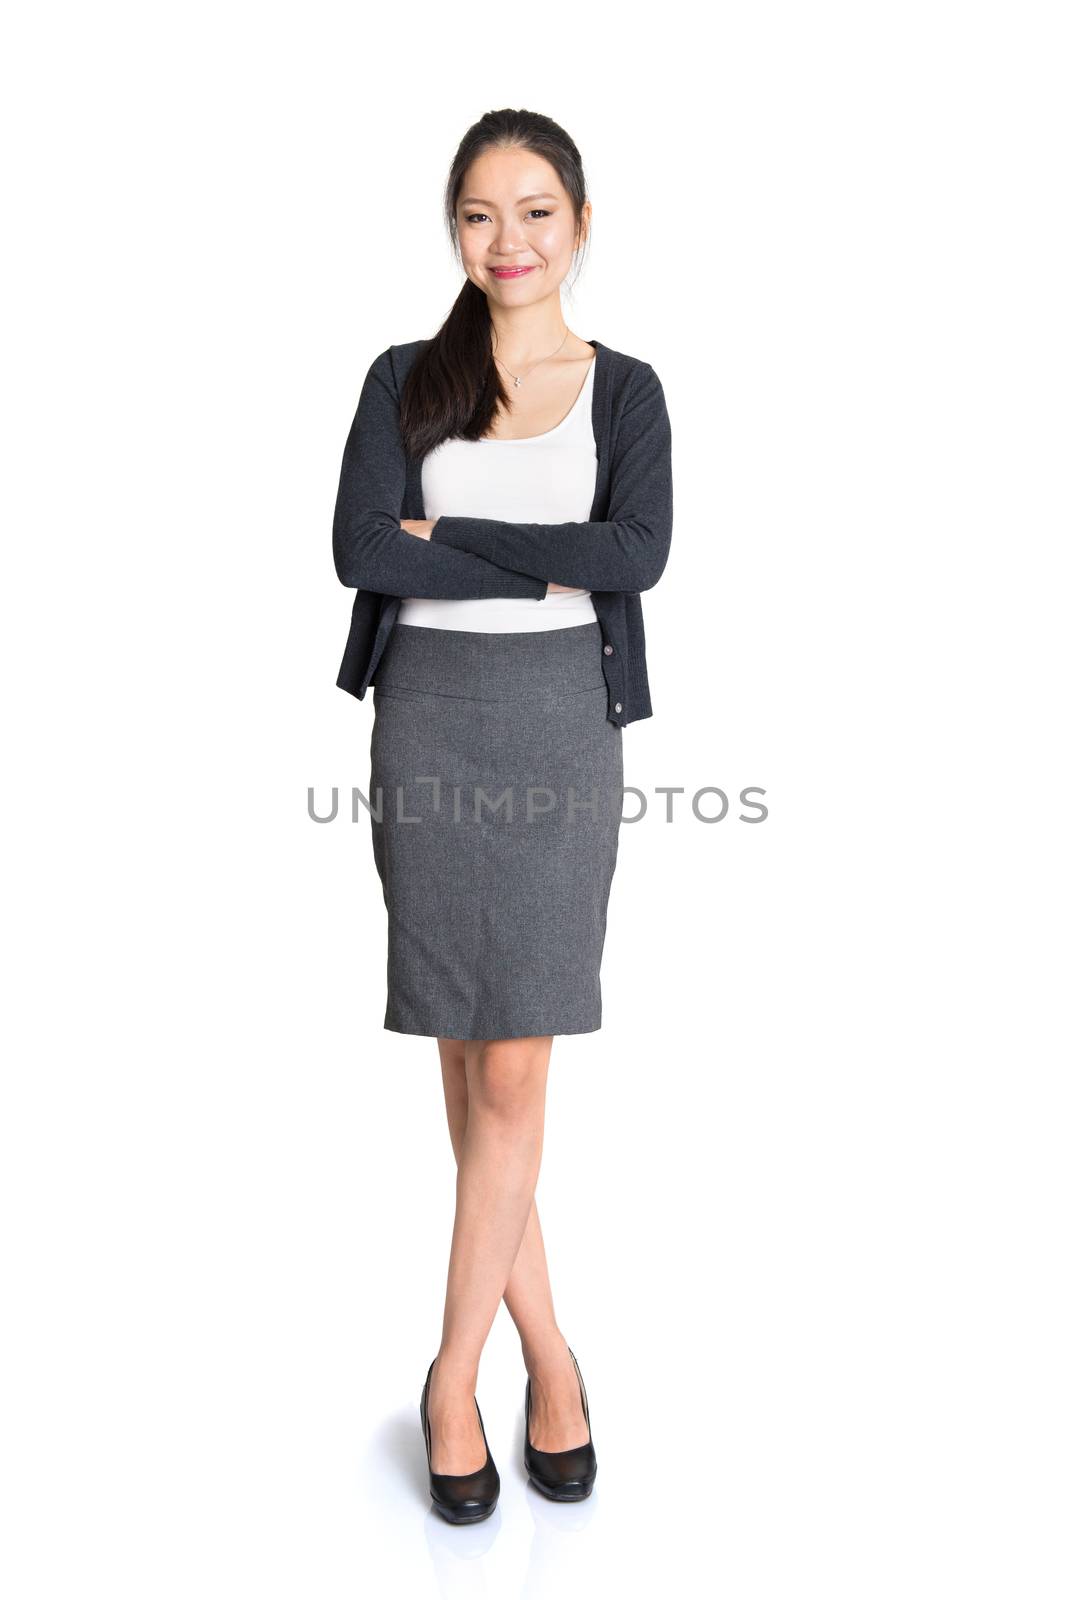 Full length portrait of young Asian female arms crossed and smiling, standing isolated on white background.